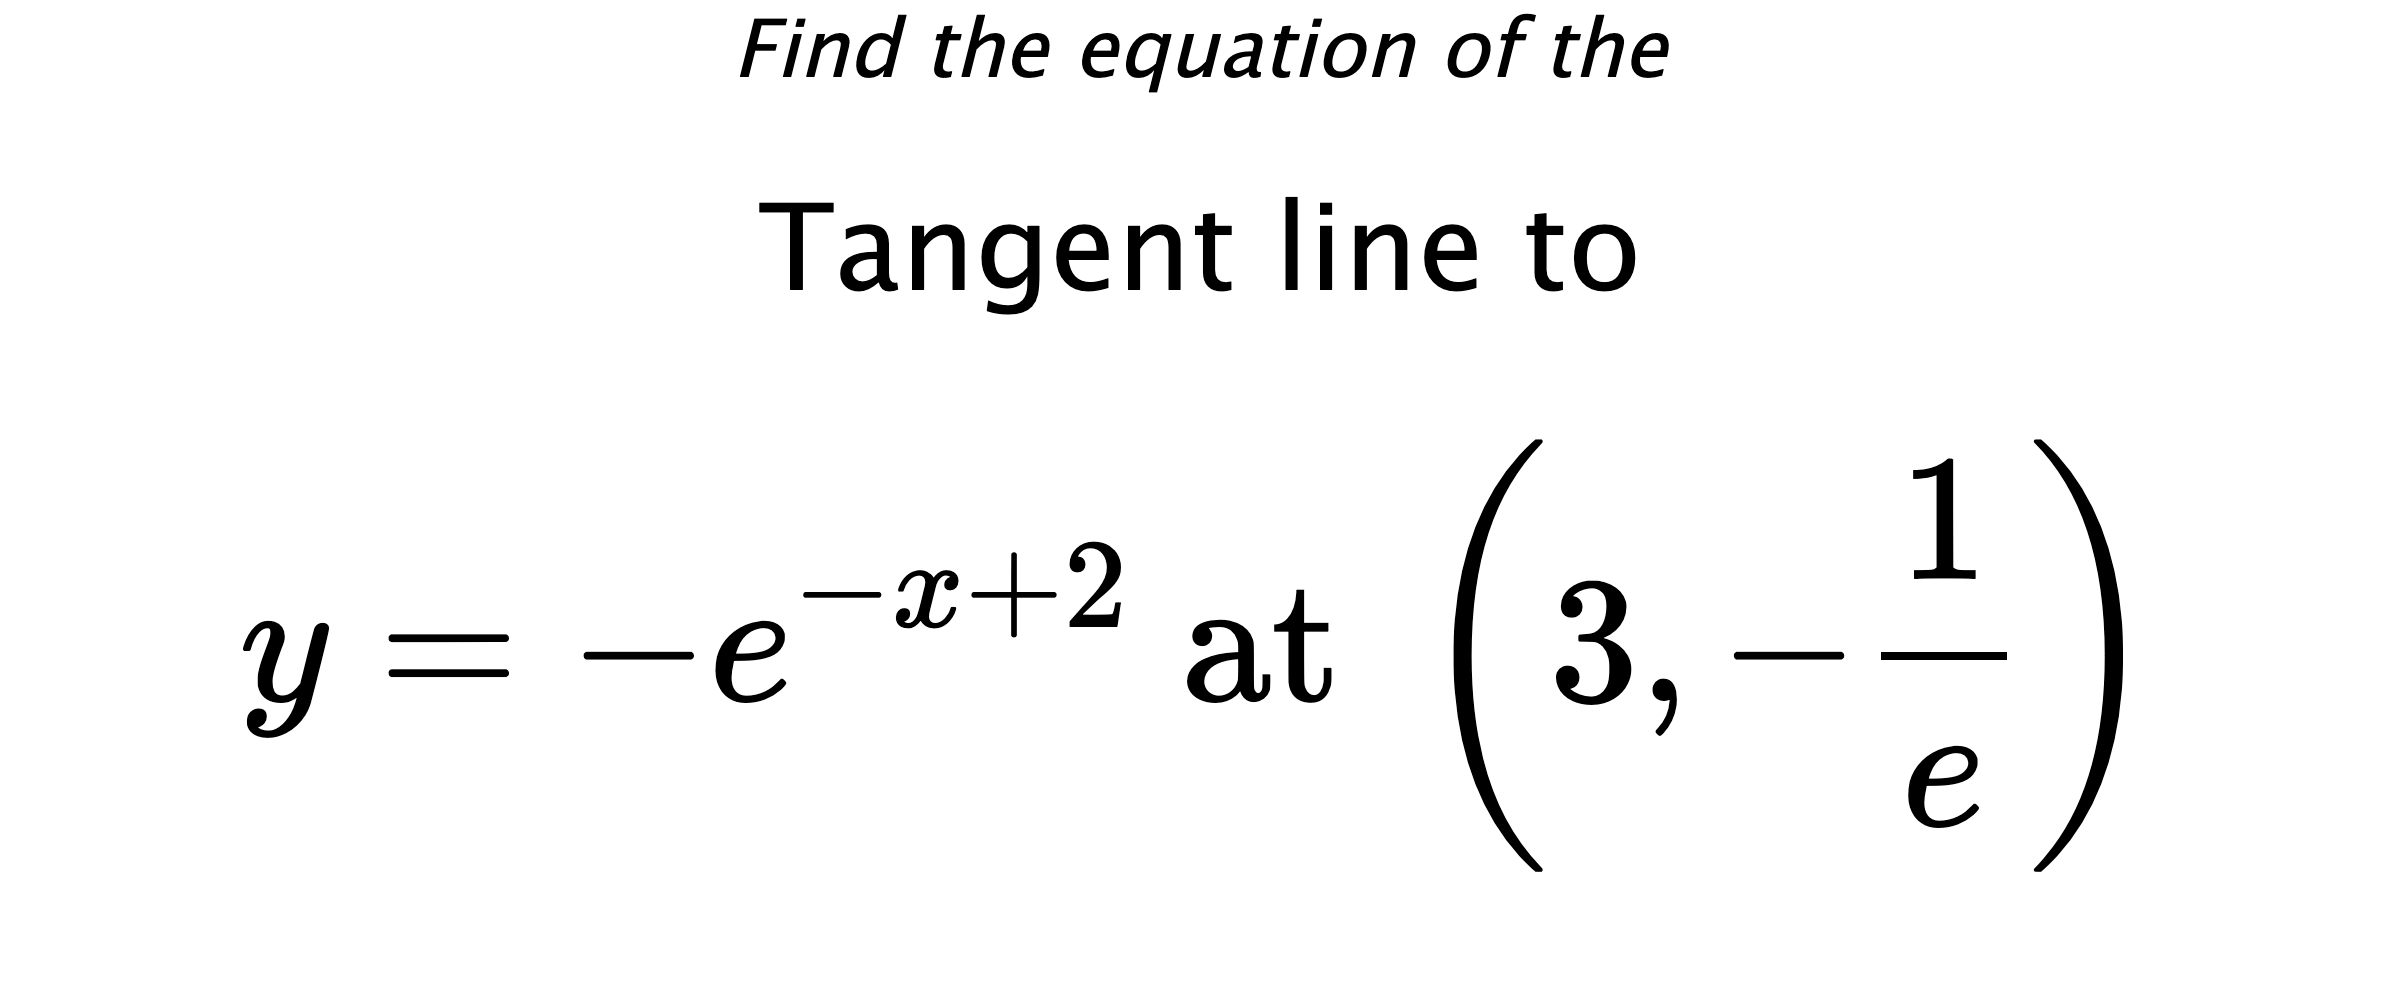 Find the equation of the Tangent line to $$ y=-e^{-x+2} \text{ at } \left(3,-\frac{1}{e}\right) $$